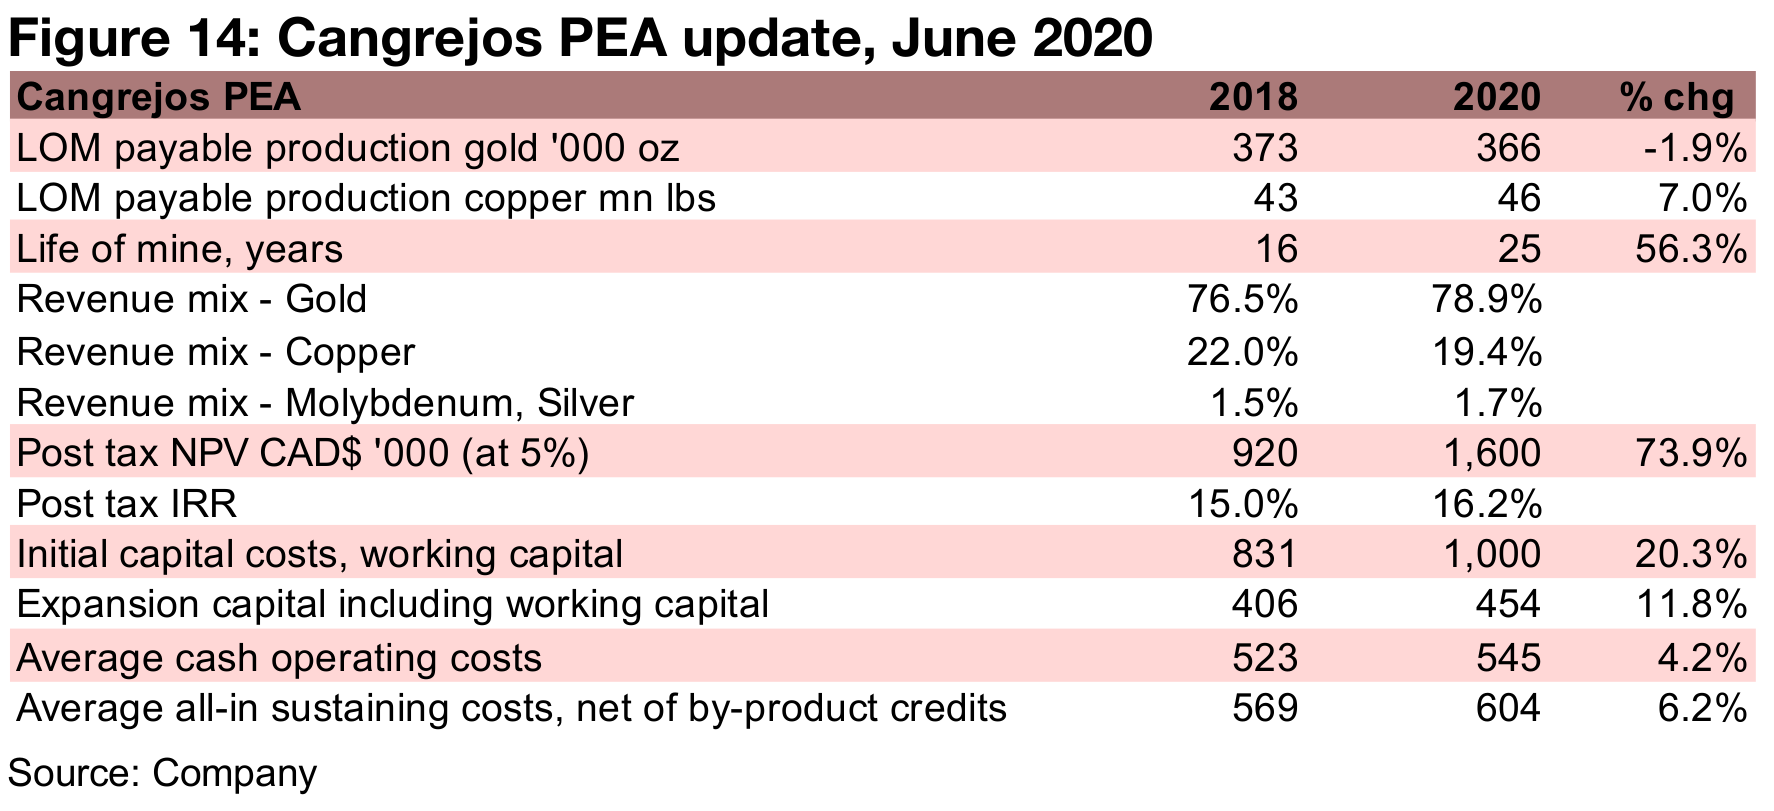 A pullback in June after updated Cangrejos PEA